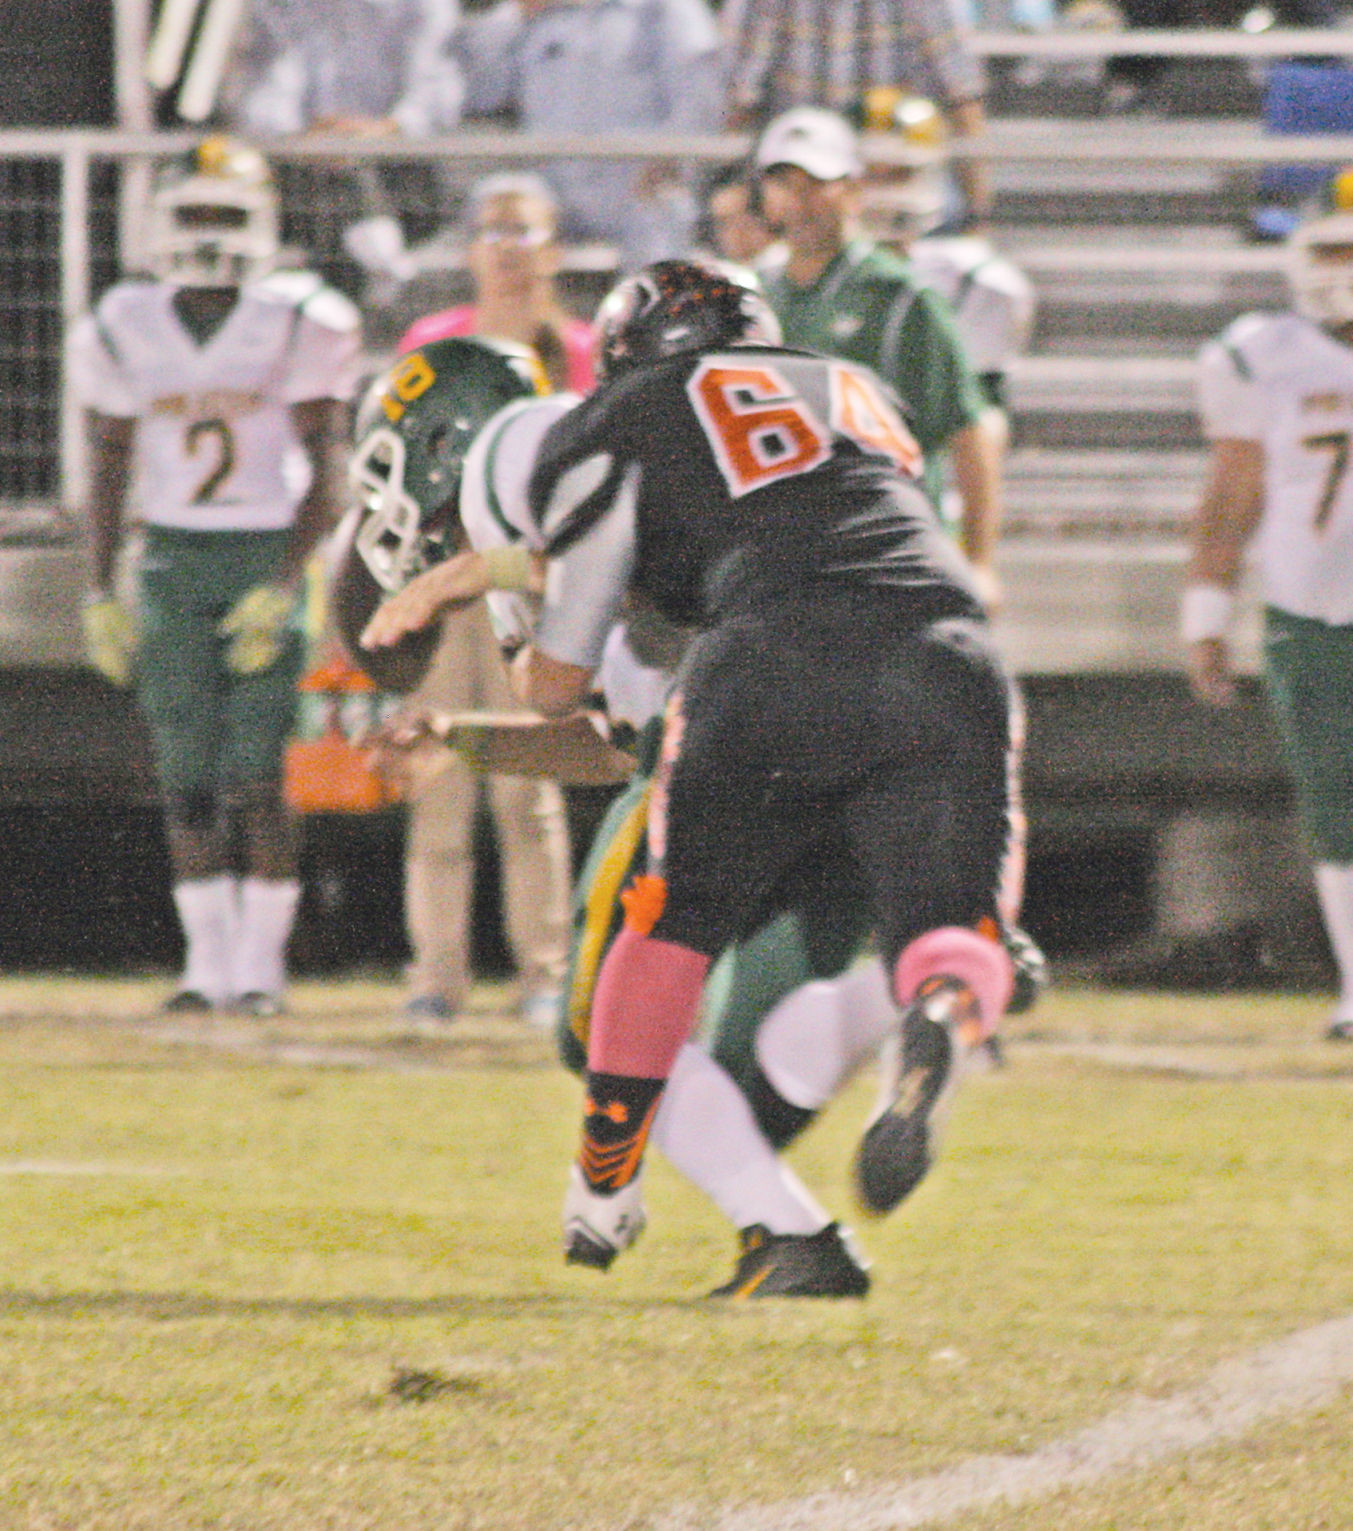 The Apaches were able to get multiple hits on the quarterback, including this sack by #64, Jose Contreras.